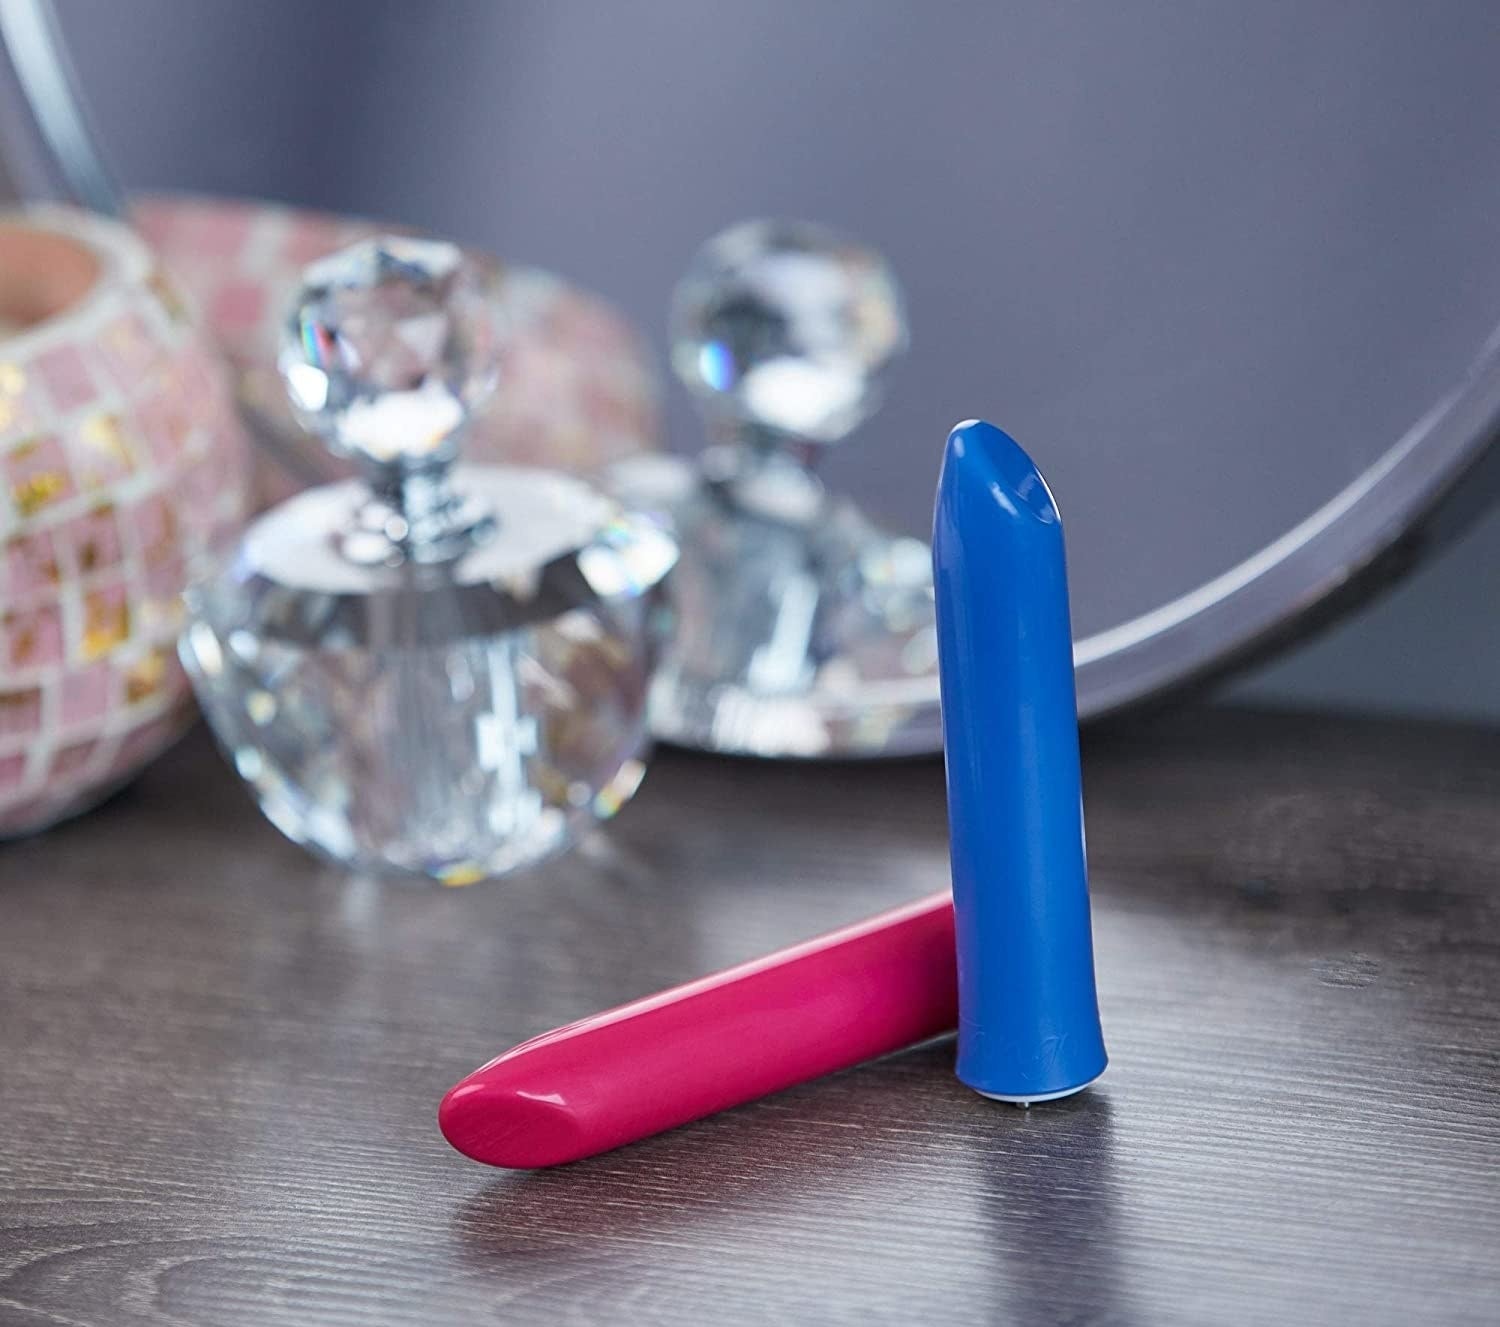 The angled-flat-tip bullets in blue and pink